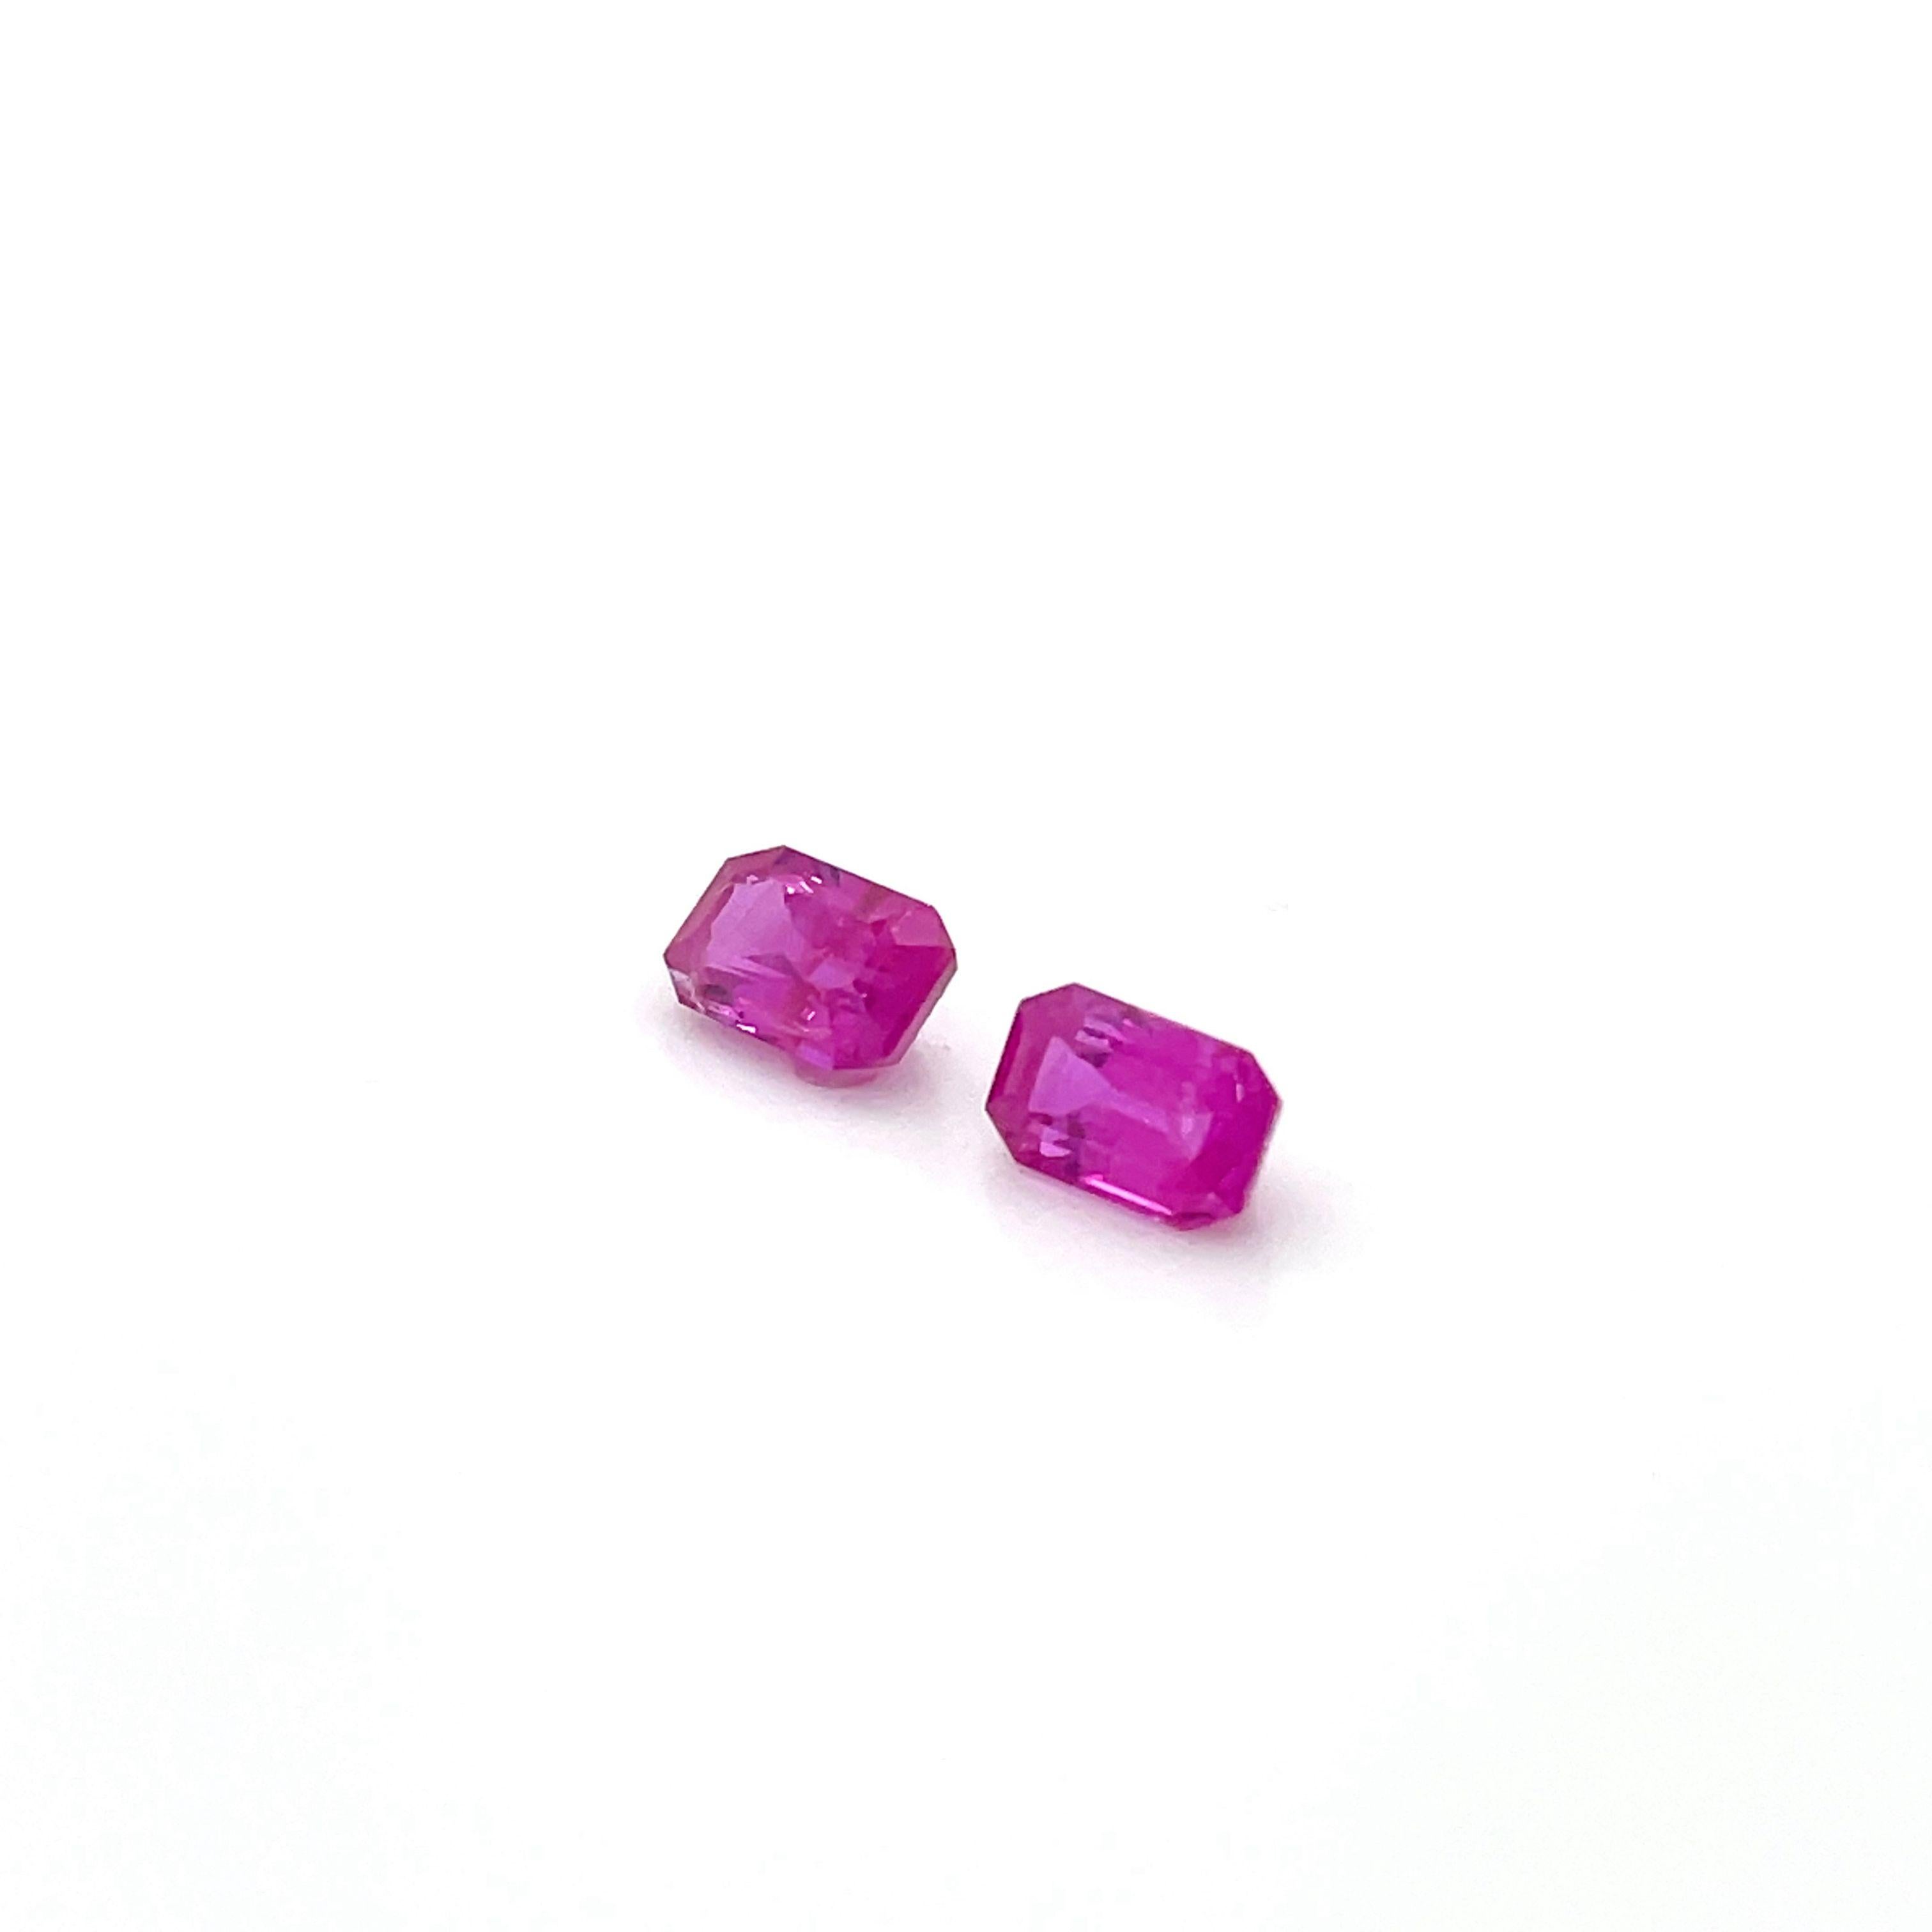 2 Rubies 2.22 Cts  For Sale 10